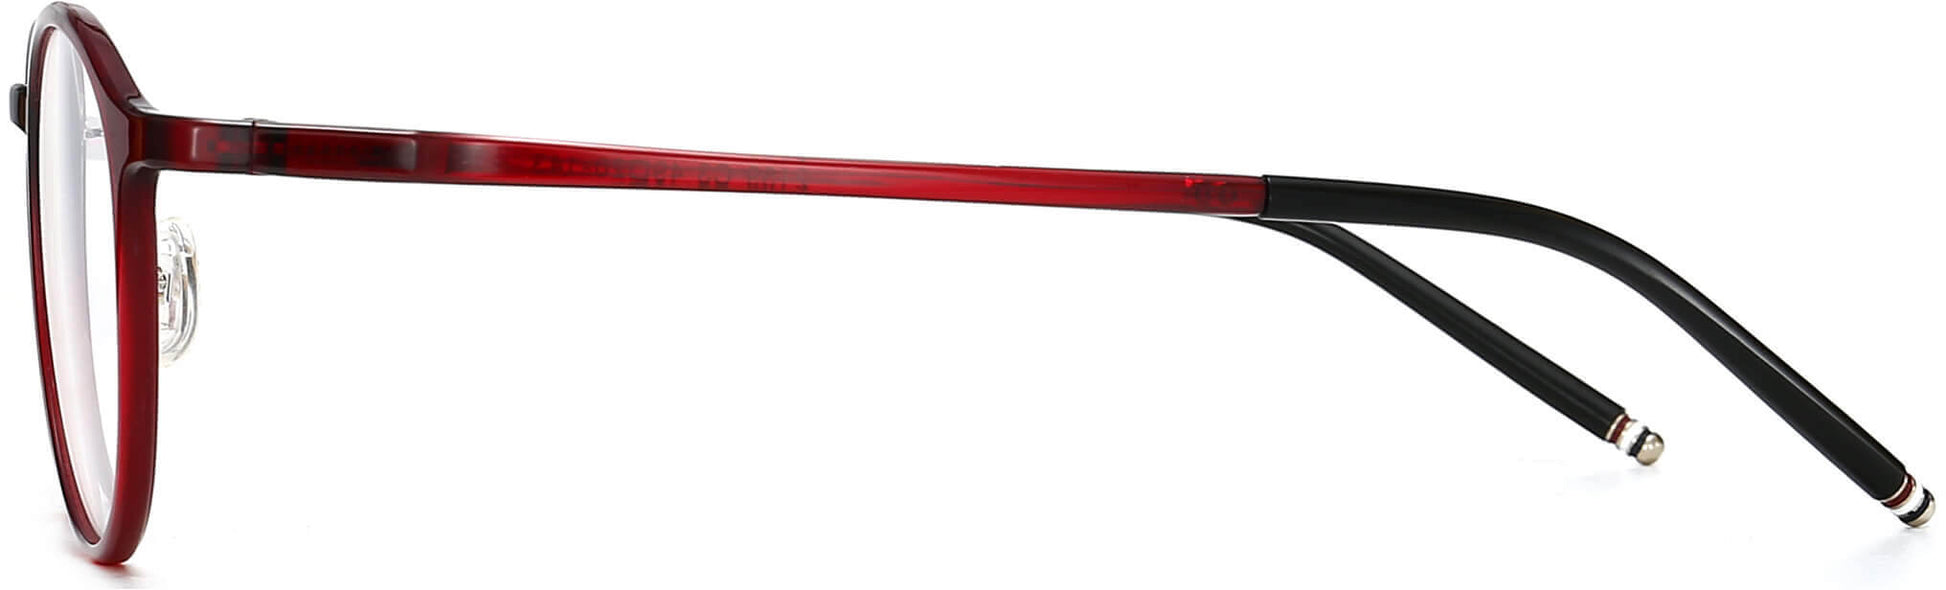 maron round red Eyeglasses from ANRRI, side view